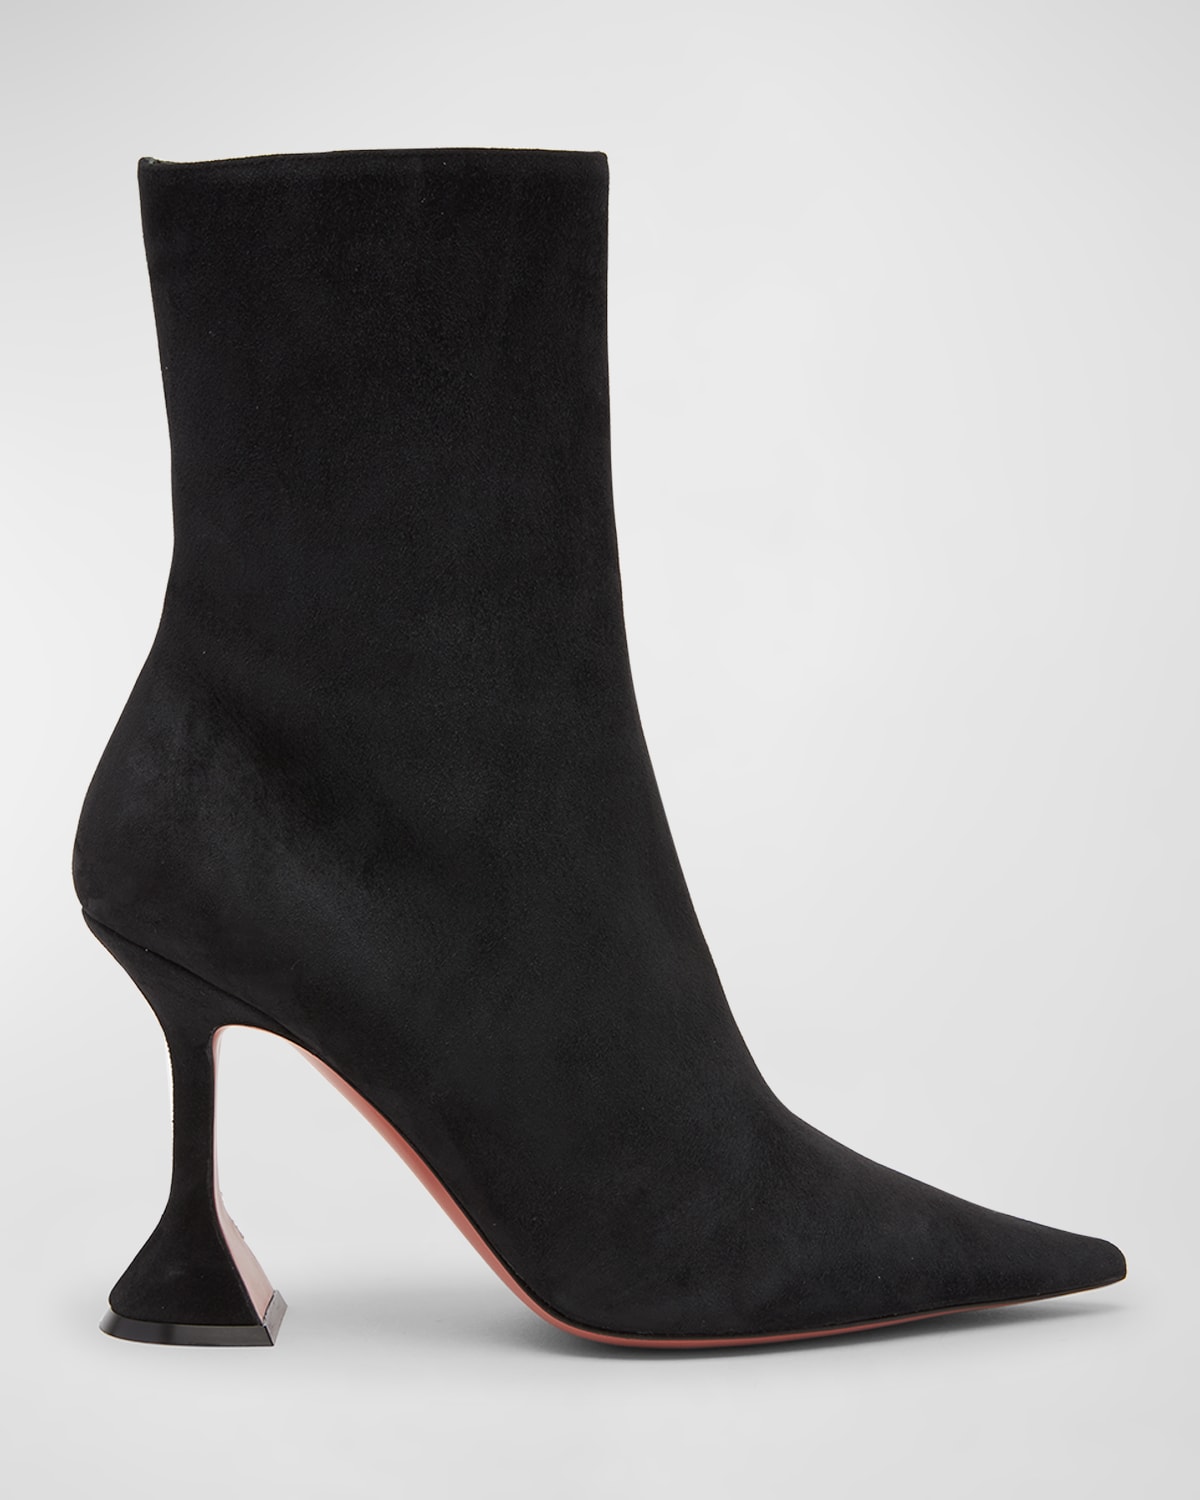 Georgia 95mm Suede Ankle Booties